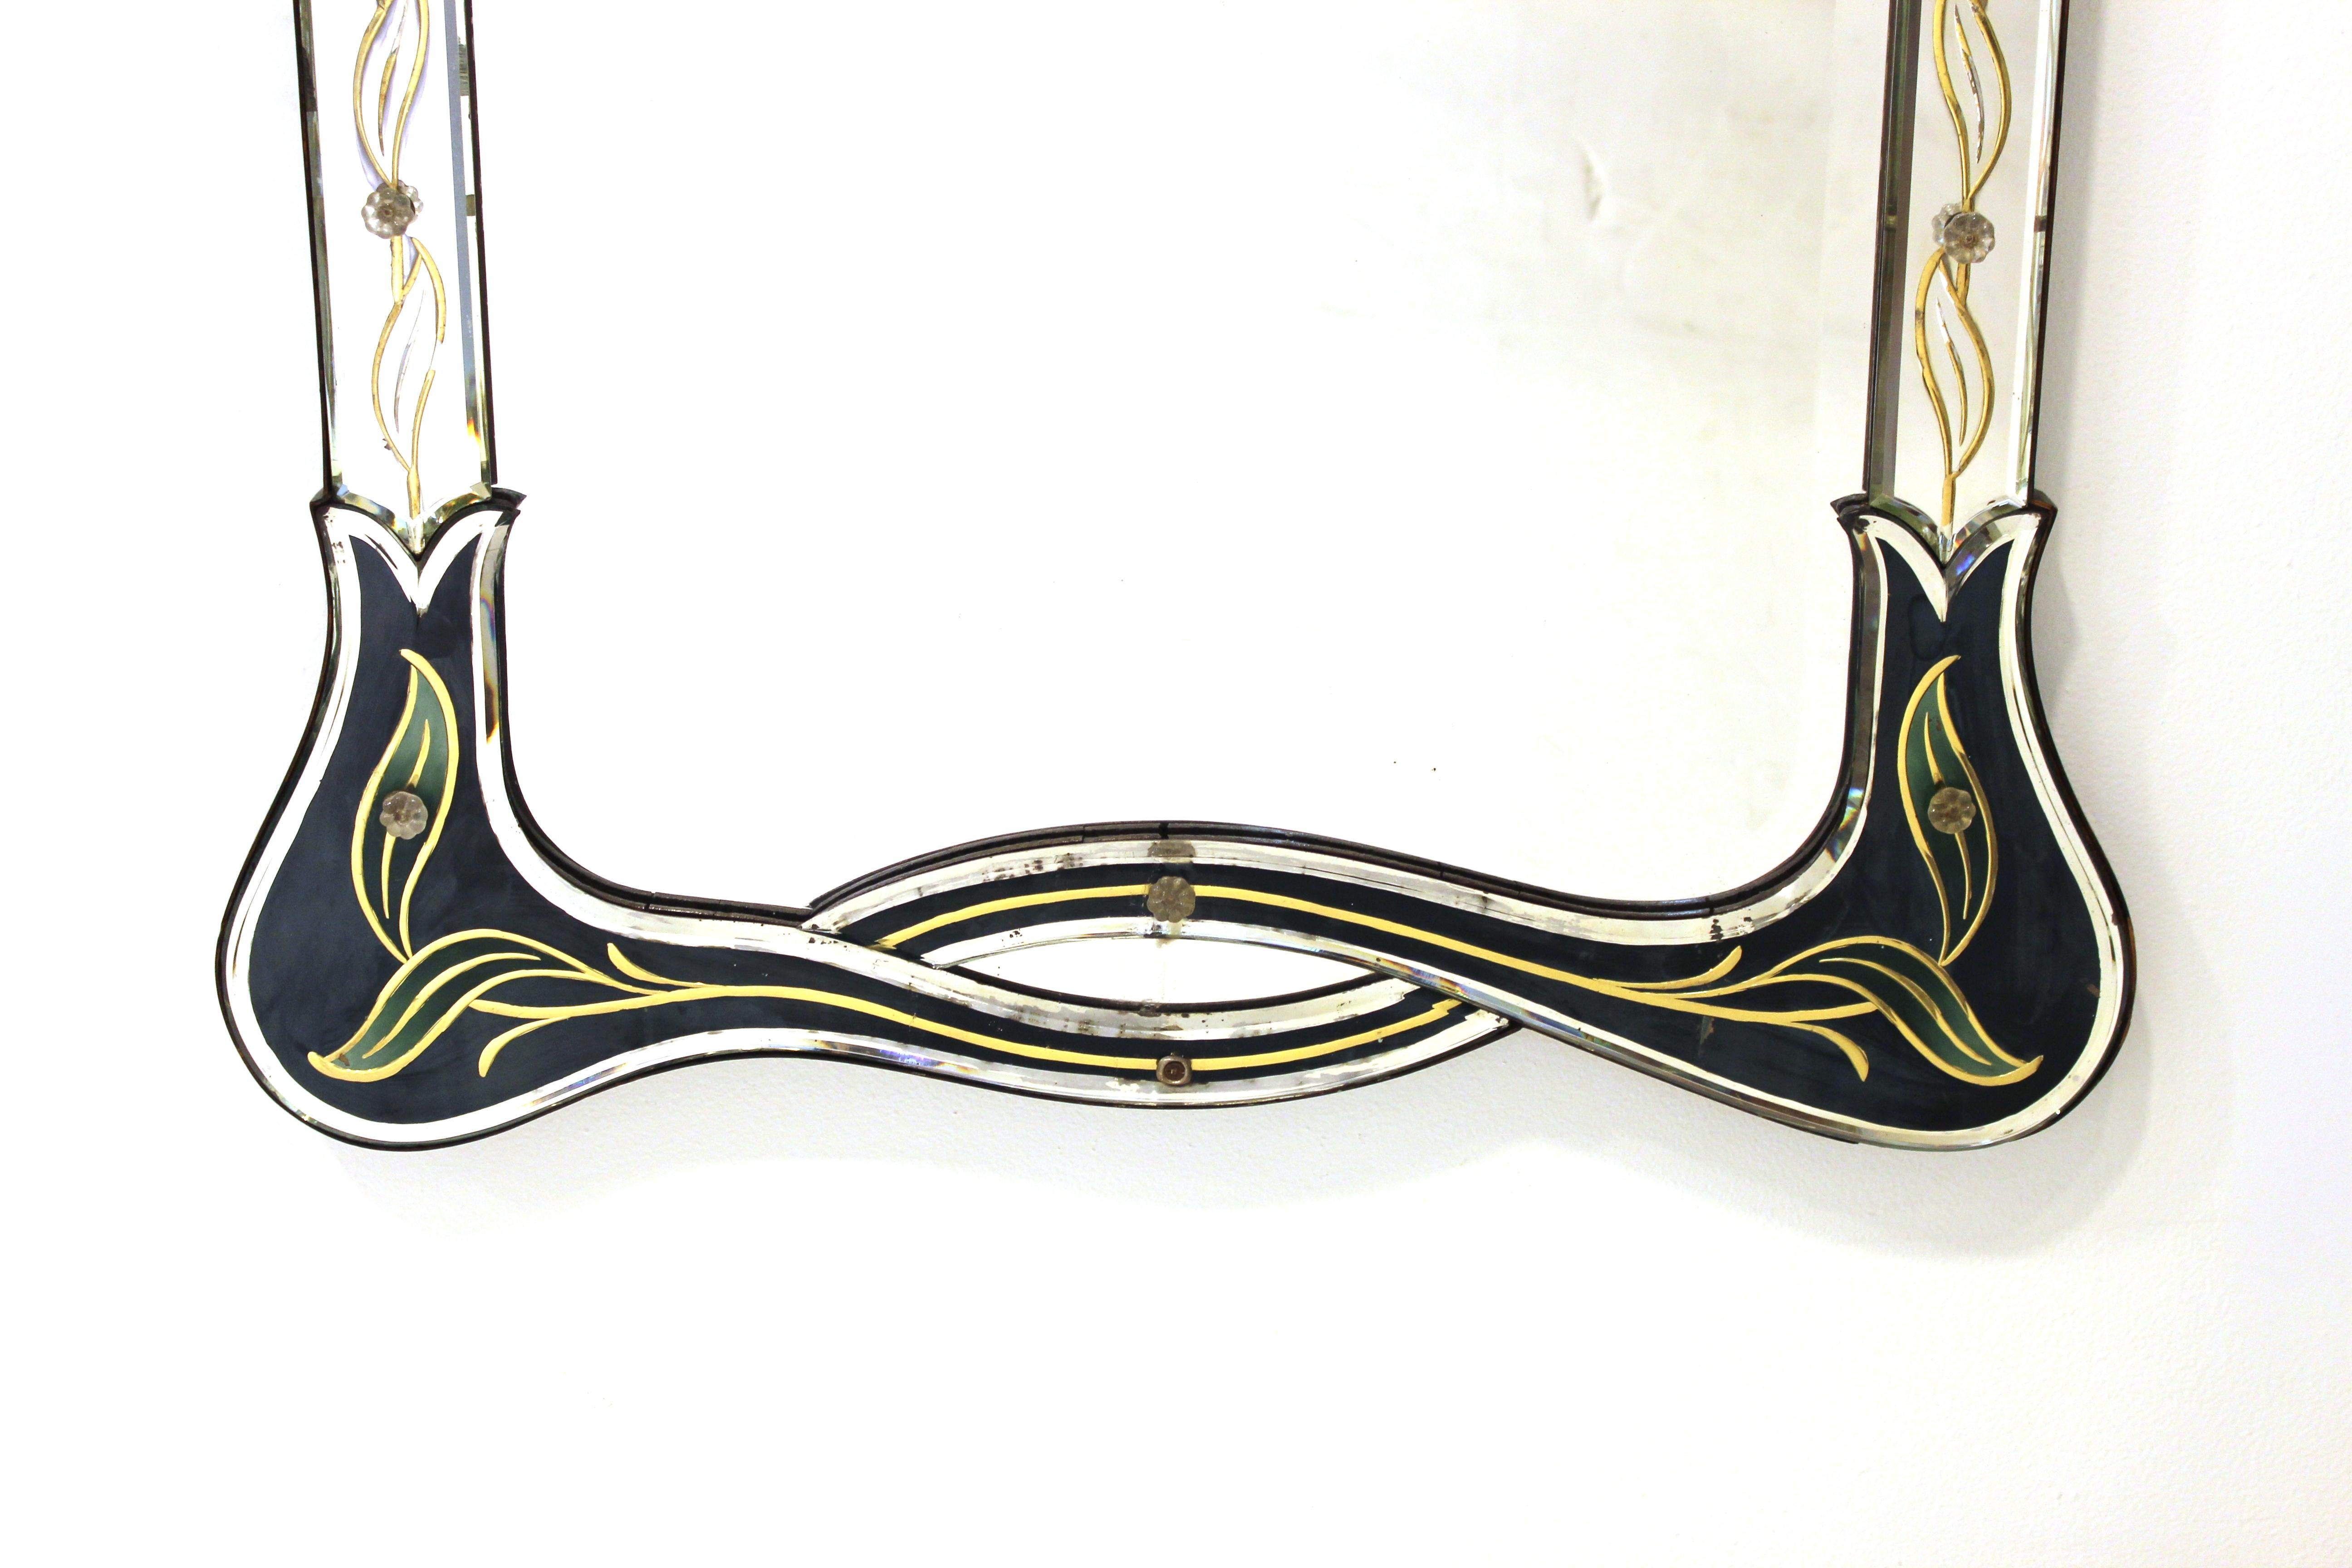 Venetian Art Nouveau style midcentury wall mirror with decorative organic lines and colored glass mirror parts. The mirror has some age-appropriate wear and age to its mirrored surfaces, but is in overall great vintage condition.